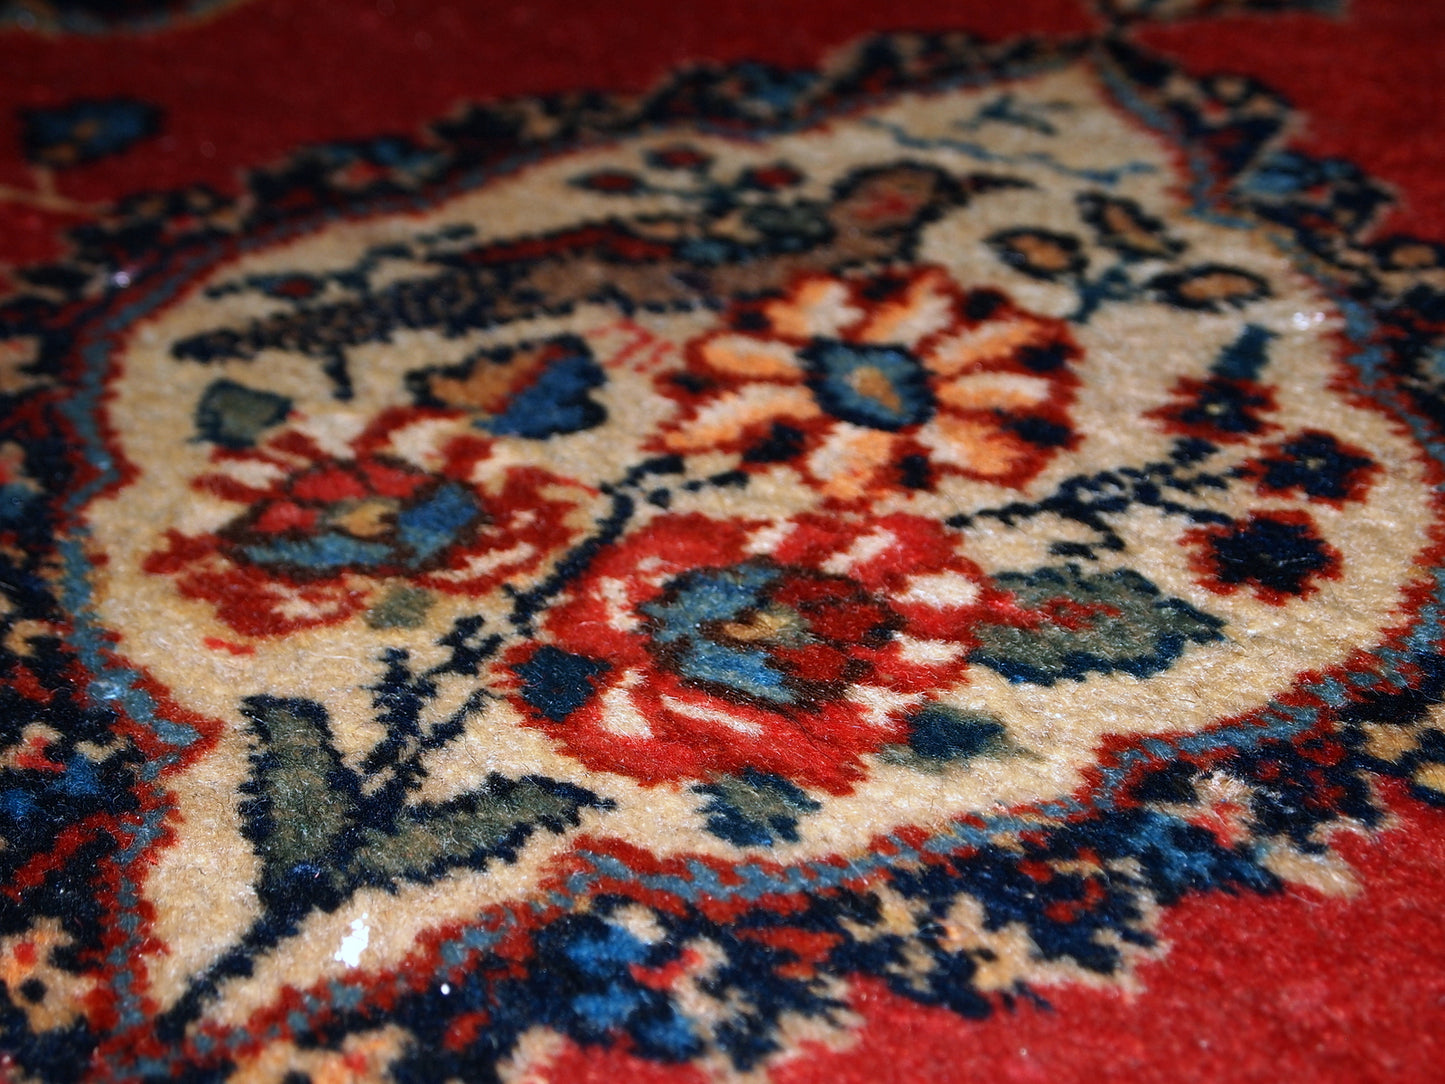 Antique Tabriz double mat in original good condition, one of the rugs has some low pile. The design is traditional with decorative birds in the center. 